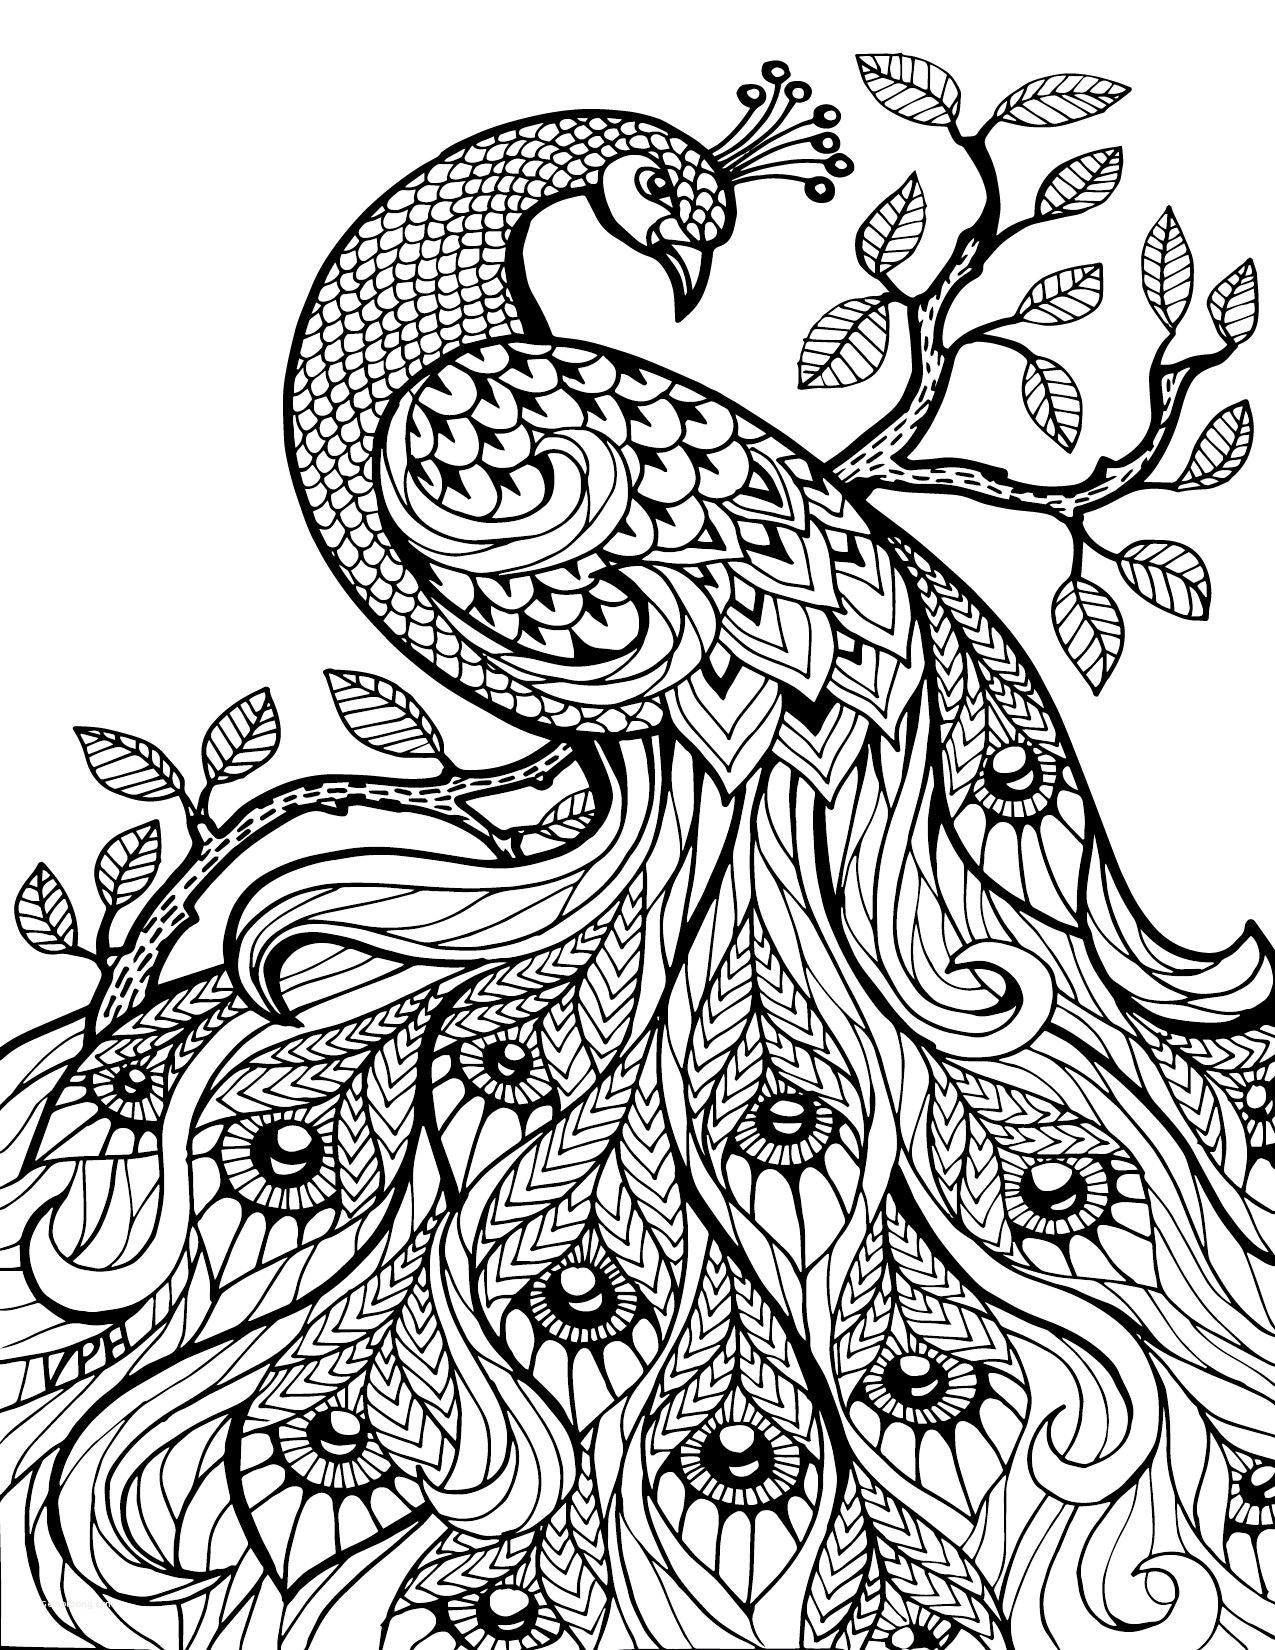 coloring pages : Spectacular Patterns Coloring Book Awesome Cool Coloring  Pages To Color Line For Free For Adults Spectacular Patterns Coloring Book  ~ peak